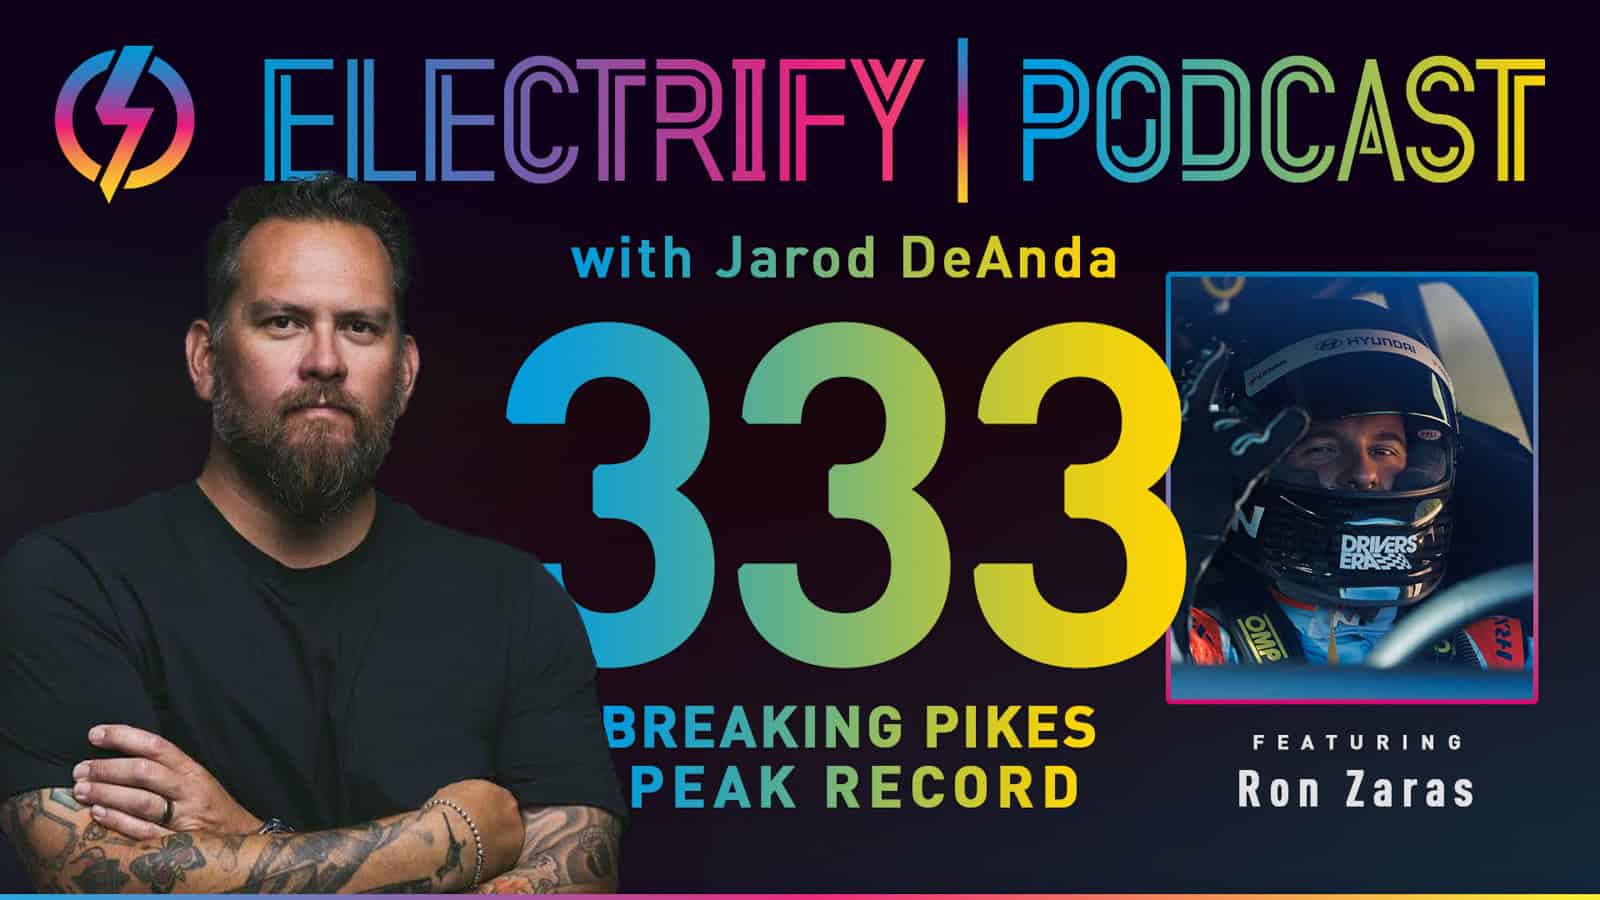 Electrify Podcast 333 with Jarod DeAnda and Ron Zaras - Breaking Pikes Peak Record